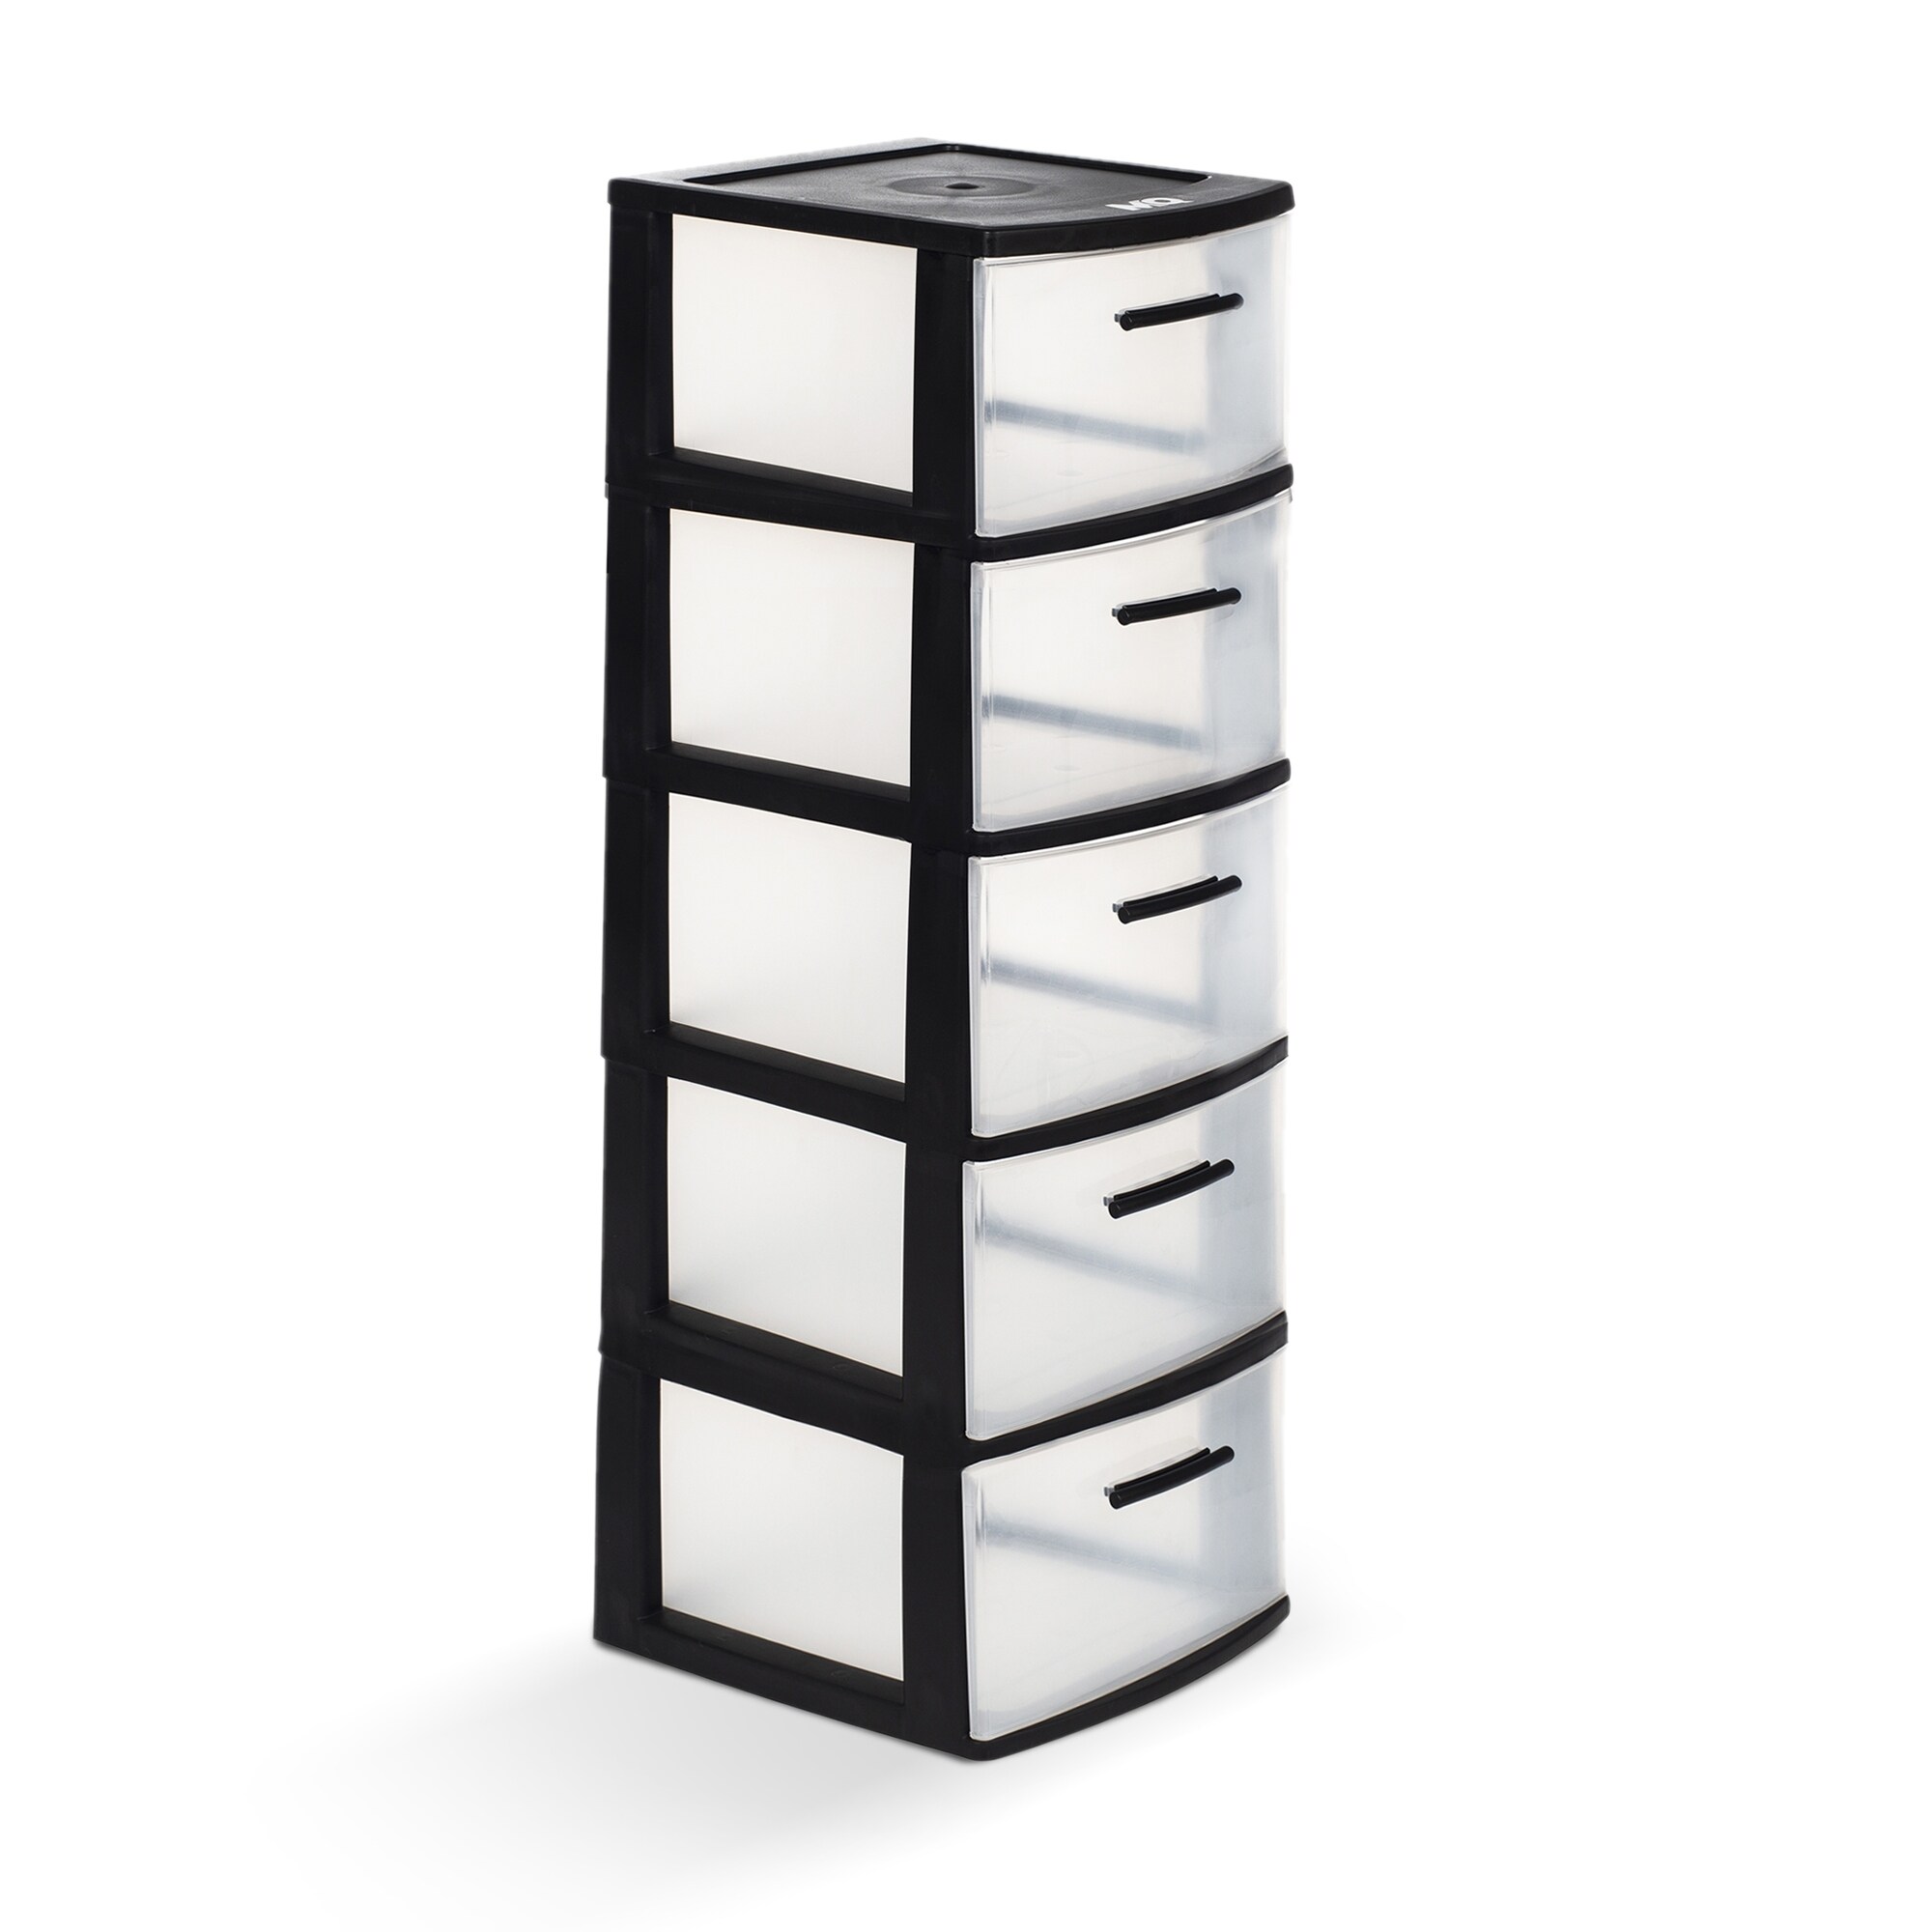 https://ak1.ostkcdn.com/images/products/is/images/direct/c20523c2b7ee24c4ce6ceedcf527f2444bcc9619/MQ-Eclypse-5-Drawer-Plastic-Storage-Unit-with-Clear-Drawers-%282-Pack%29.jpg